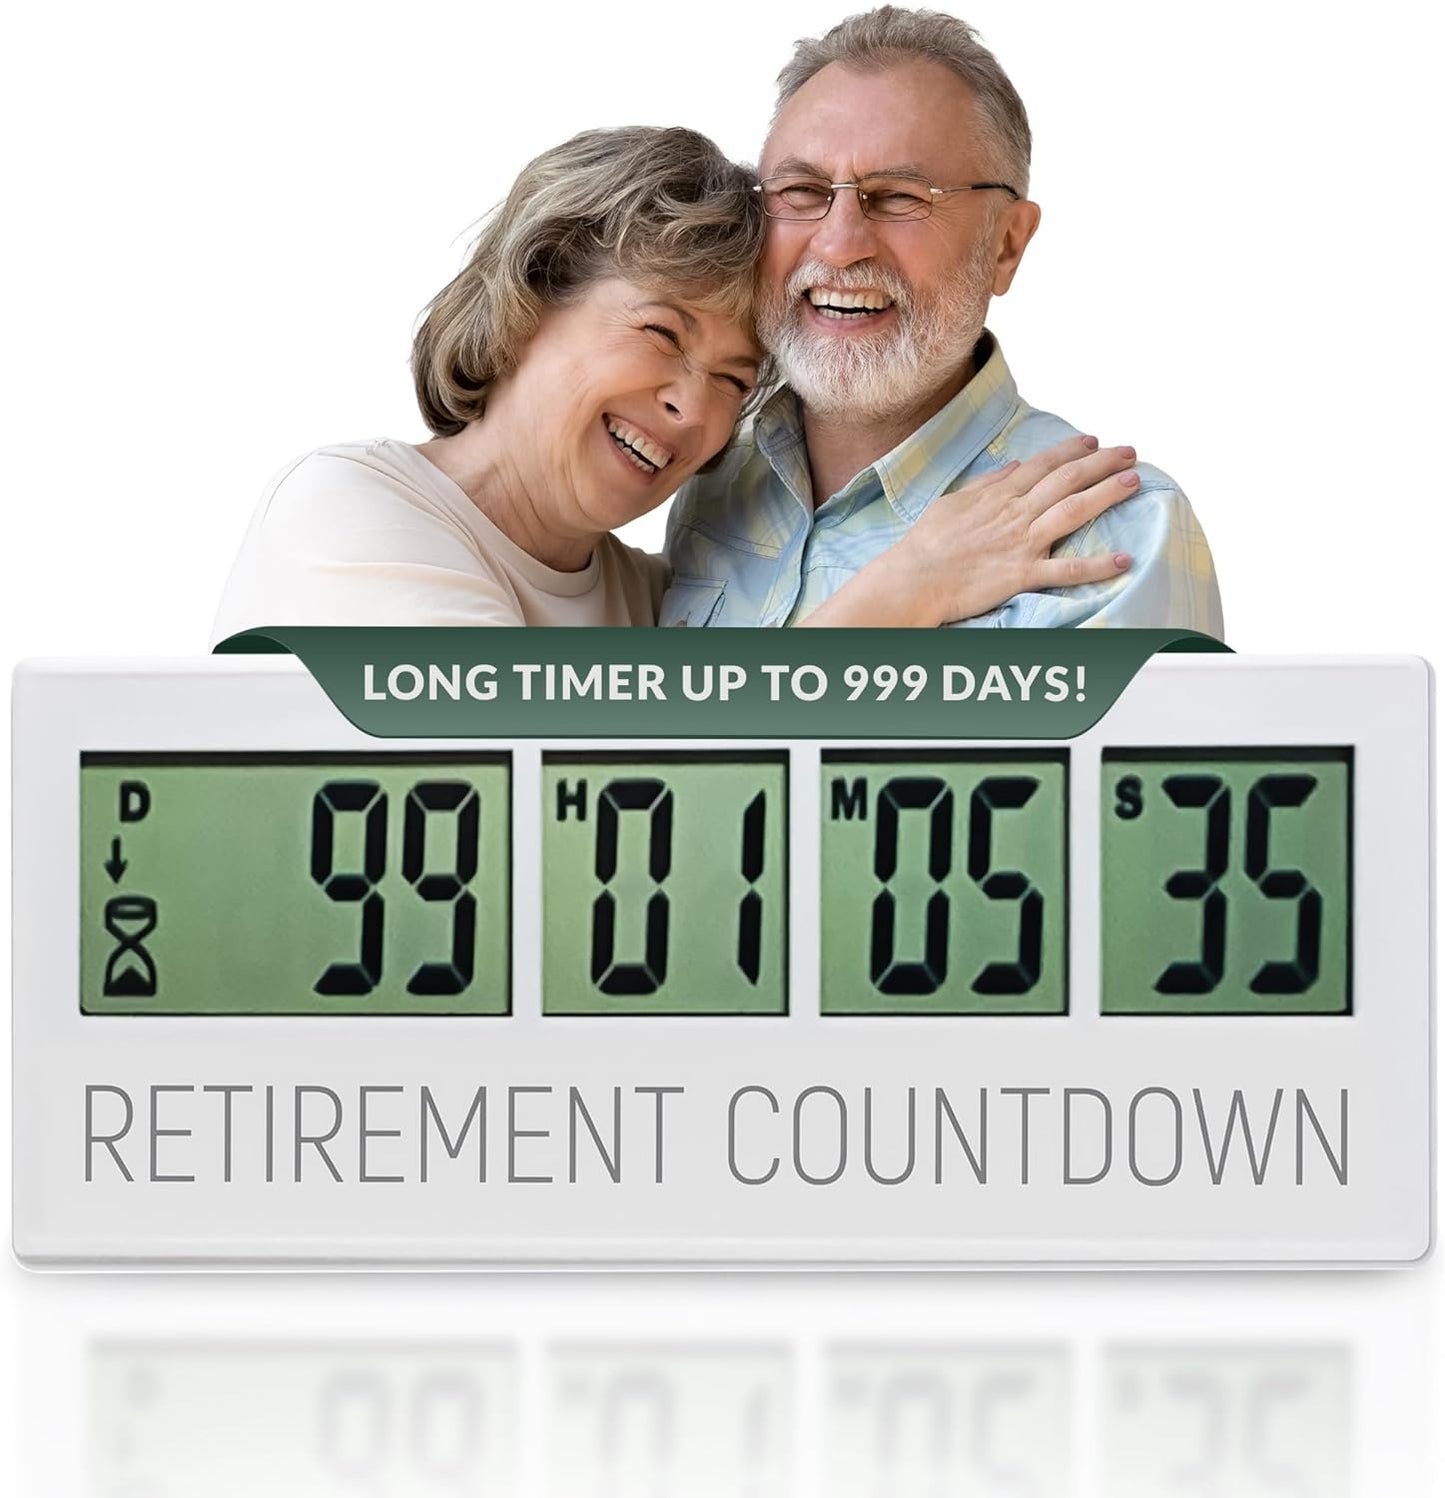 Retirement Countdown Clock - Up to 999 Days LCD Digital Timer - Easy to Set and Read Retirement Countdown Timer - Large Display Timers - Reusable for Wedding, Pregnancy Countdown & More